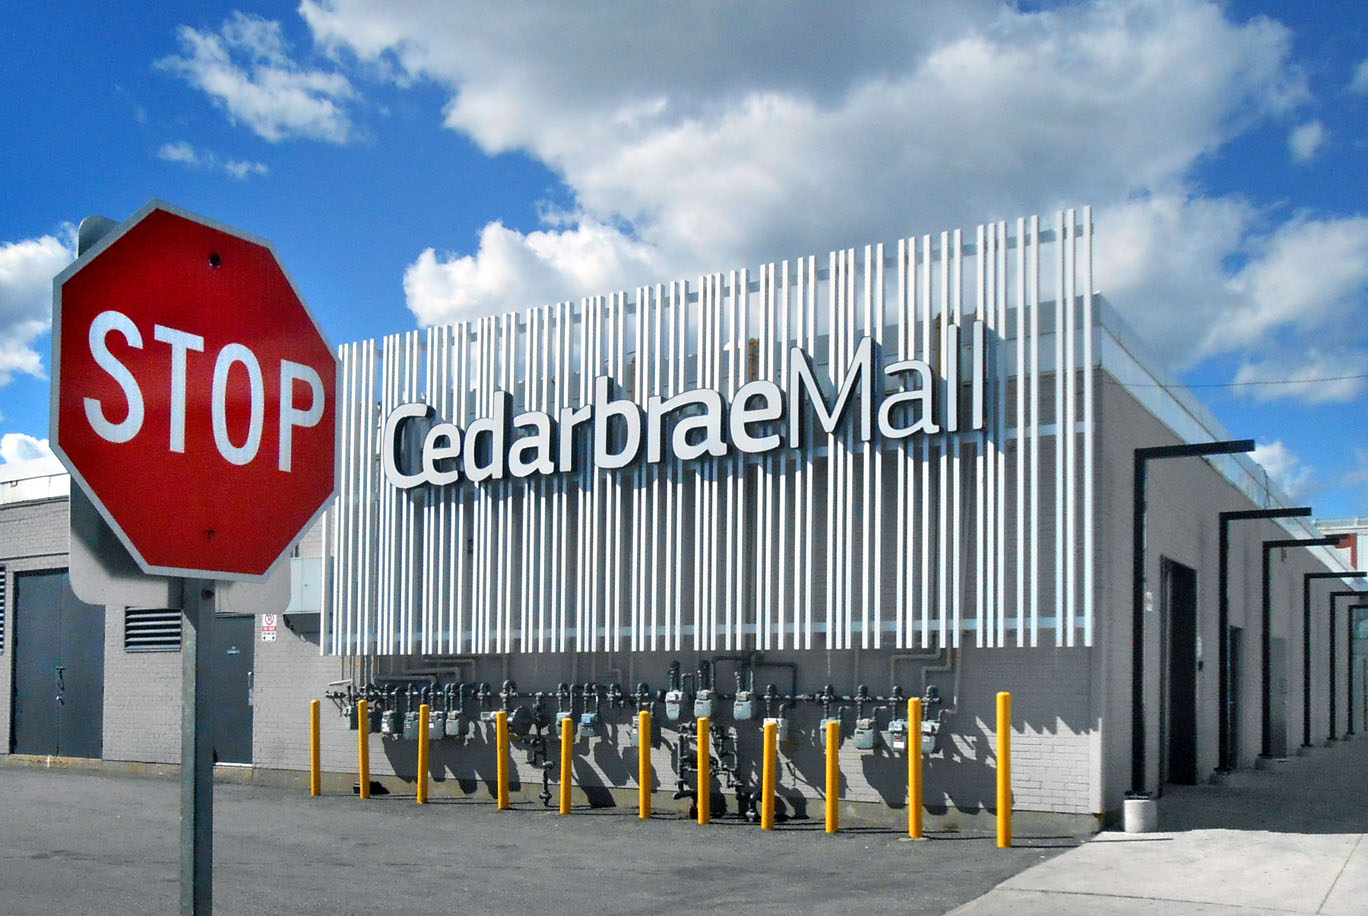 Cedarbrae Mall sign and stop sign.jpg